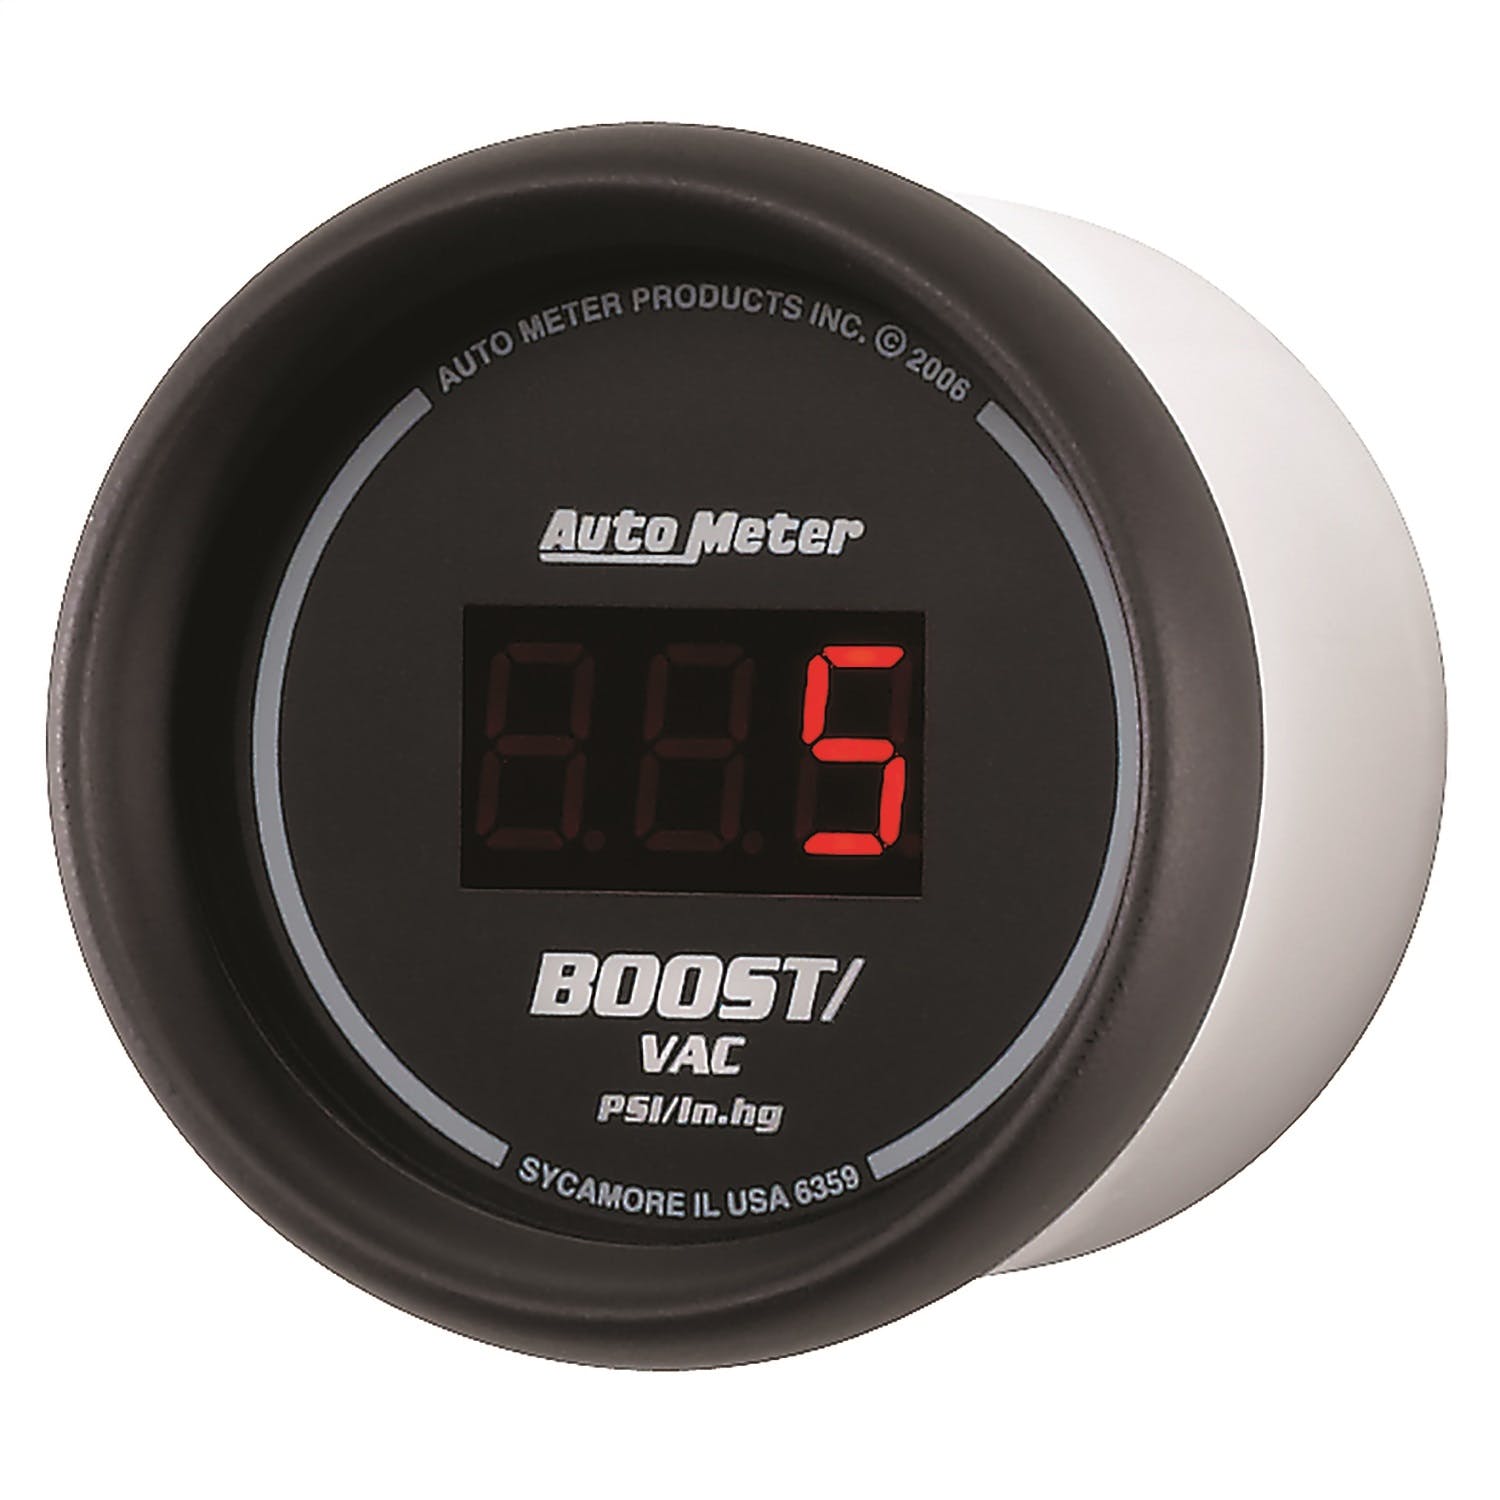 AutoMeter Products 6359 2-1/16in Boost-Vac, 30/30 Digital Black